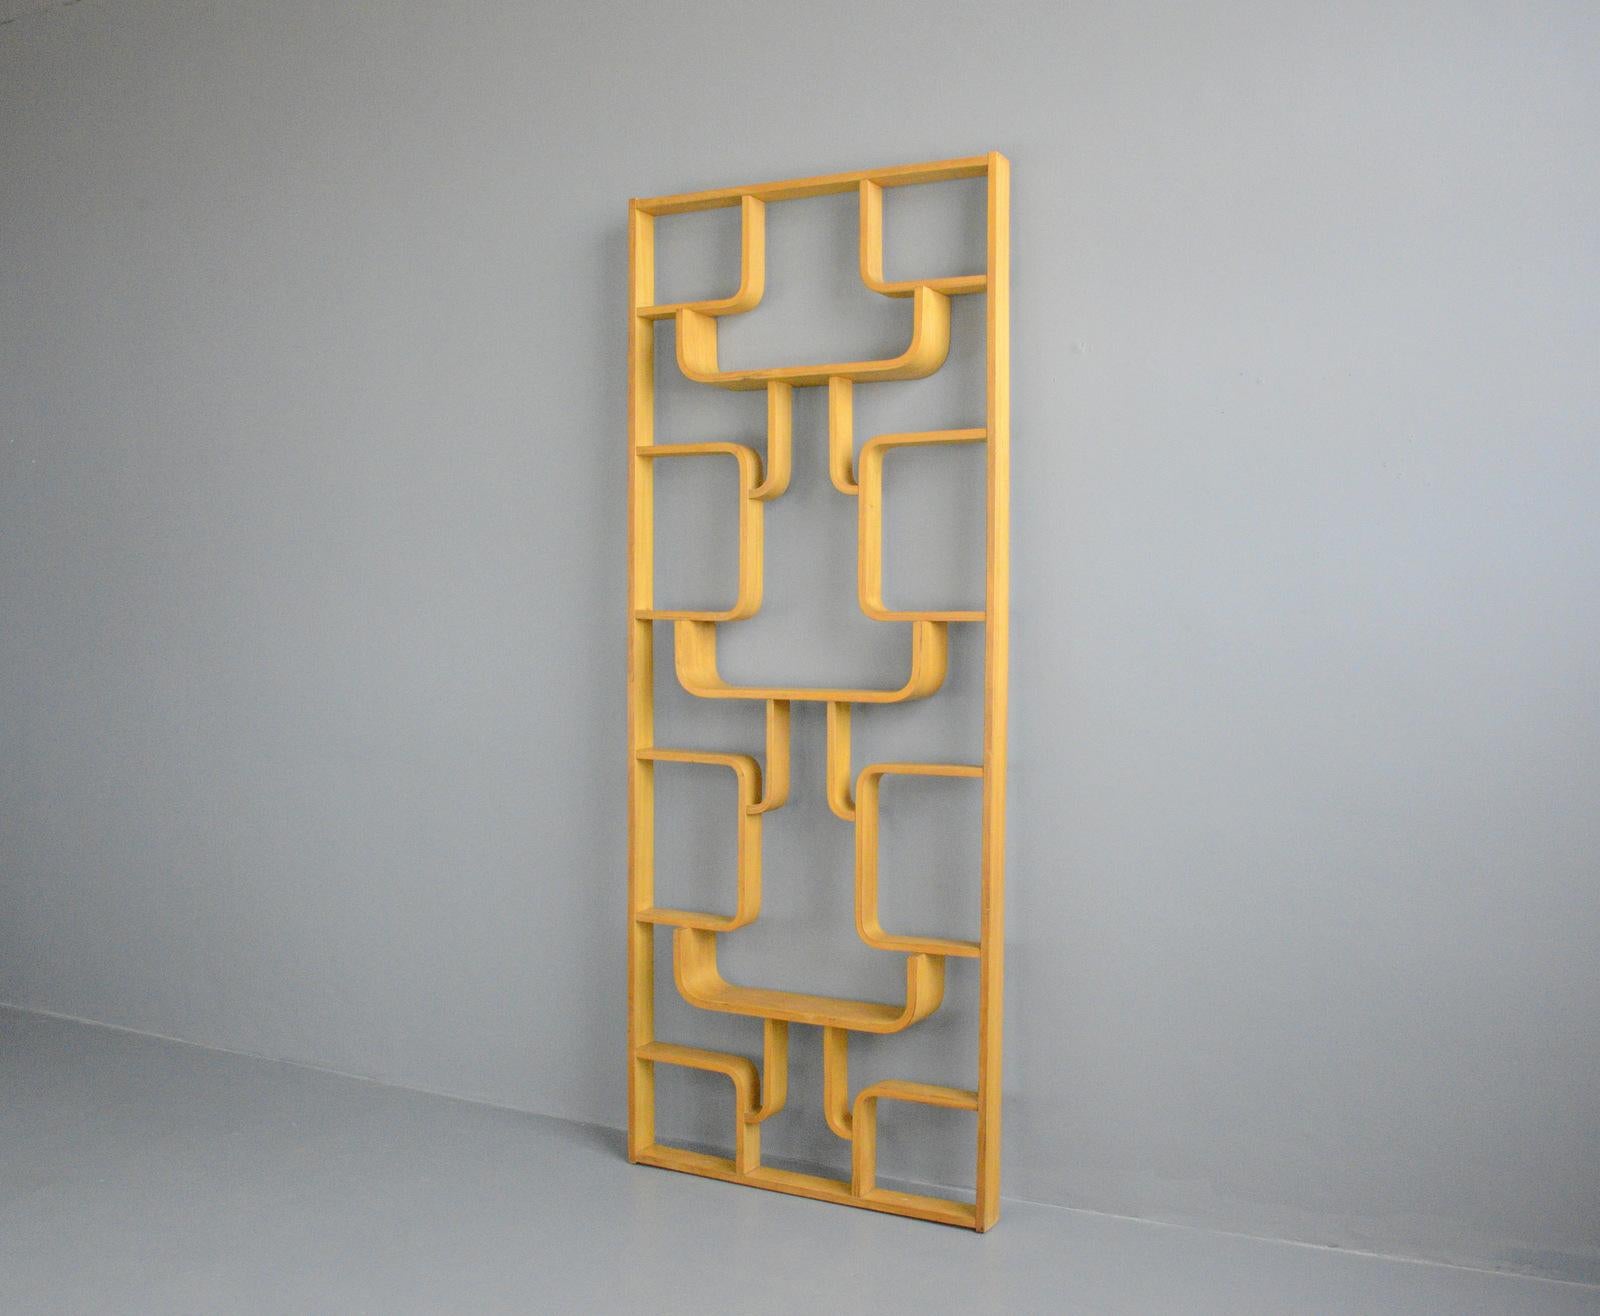 Midcentury room divider by Ludvik Volak, circa 1960s

- Made from curved beech
- Designed by Ludvik Volak
- Produced by Drevopodnik Holesov
- Czech, 1960s
- Measures: 225cm tall x 91cm wide x 16cm deep

Condition report

Some age marks and